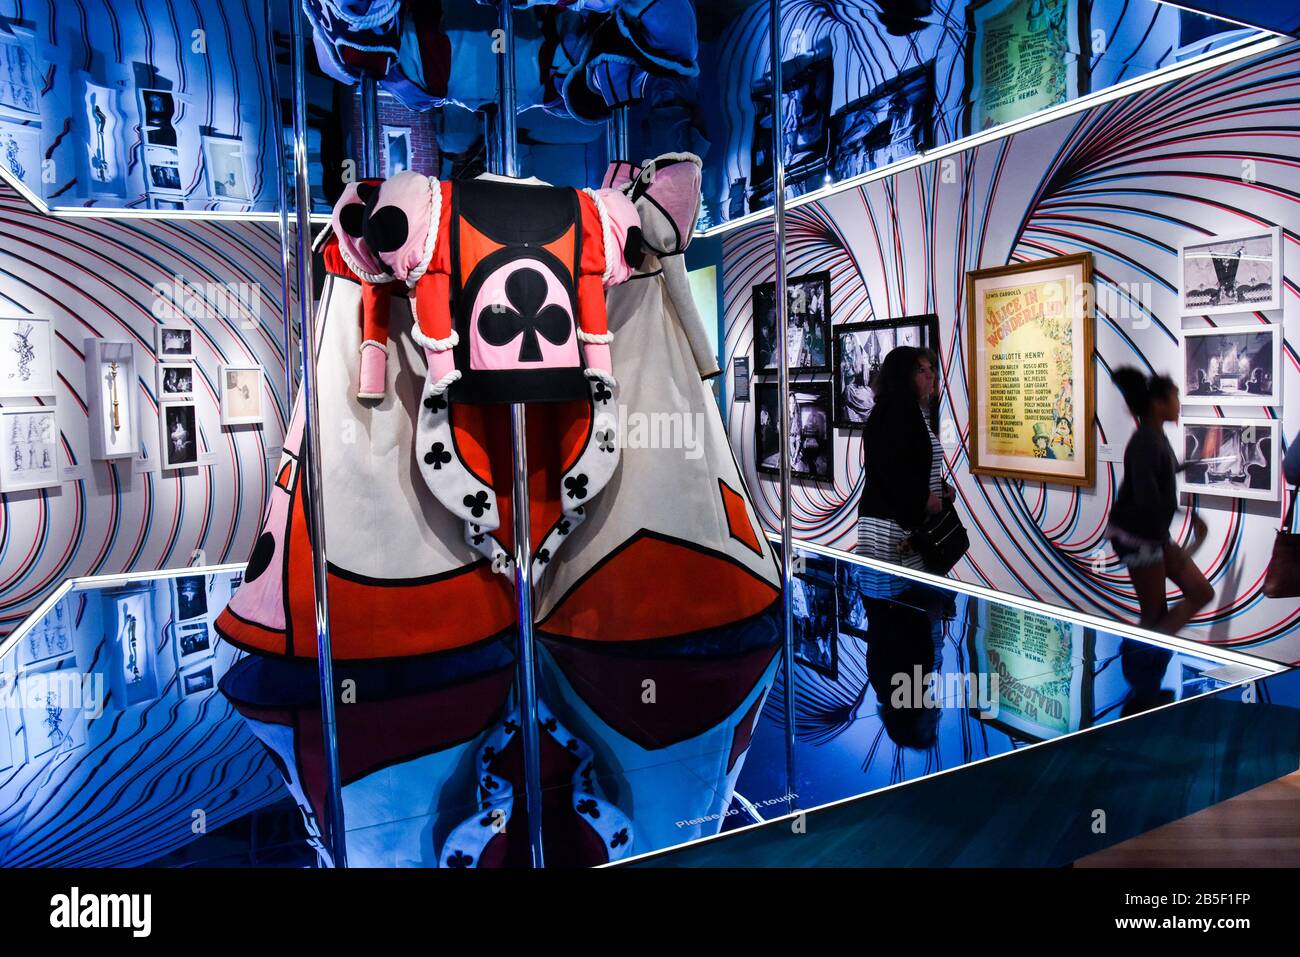 Wellington, New Zealand. 8th Mar, 2020. People visit the exhibition 'Wonderland' at the Te Papa National Museum in Wellington, New Zealand, March 8, 2020. The three-month exhibition 'Wonderland' ended on Sunday, which displayed more than 300 objects and props related to the famous British literature 'Alice in Wonderland'. Credit: Guo Lei/Xinhua/Alamy Live News Stock Photo